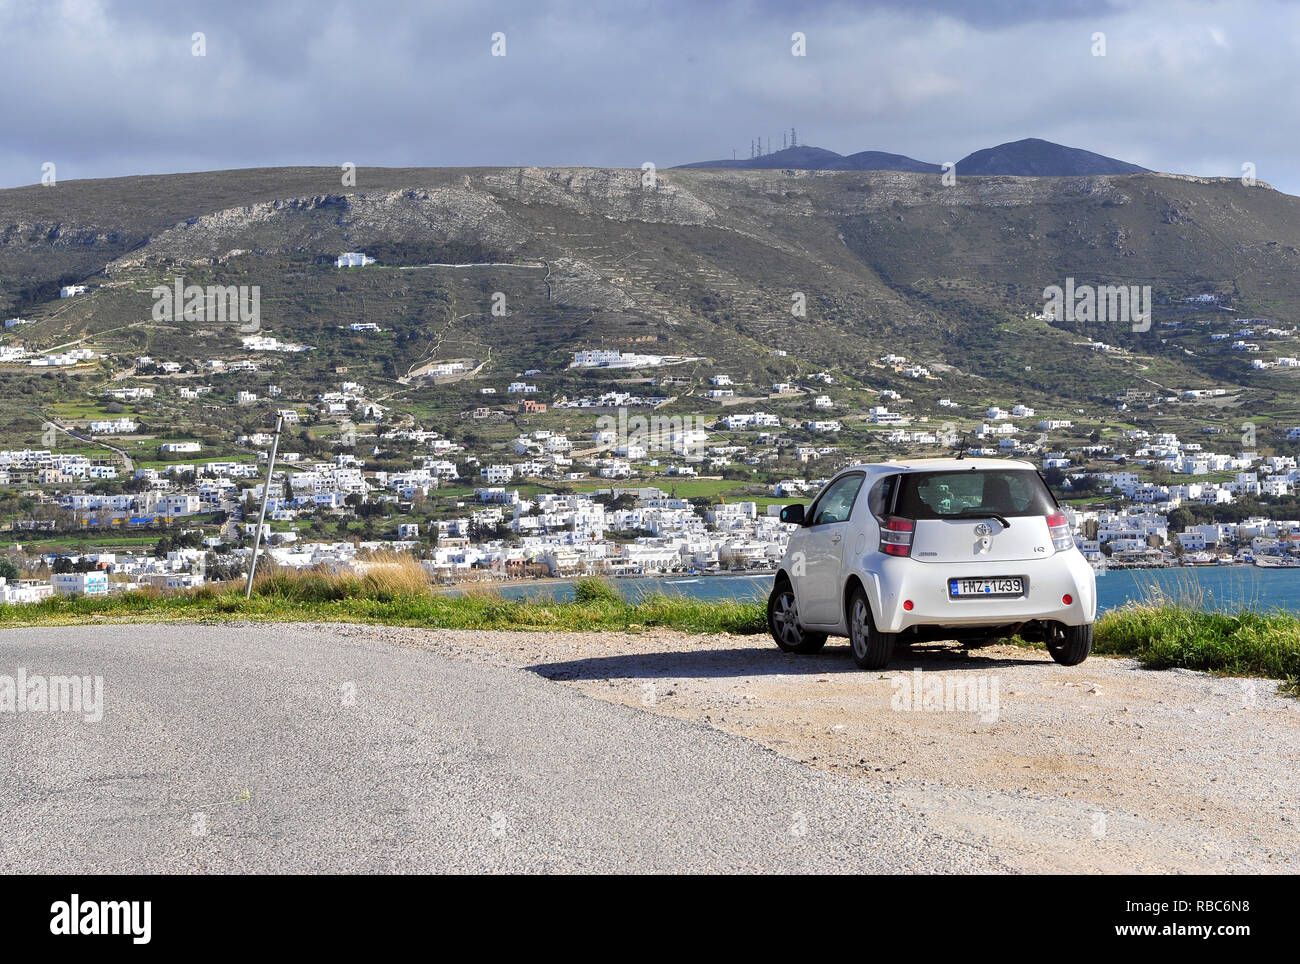 PARIKIA, GREECE - MARCH 23: New Toyota IQ car parked on the hill in Parikia, Greece on March 23, 2018. Stock Photo